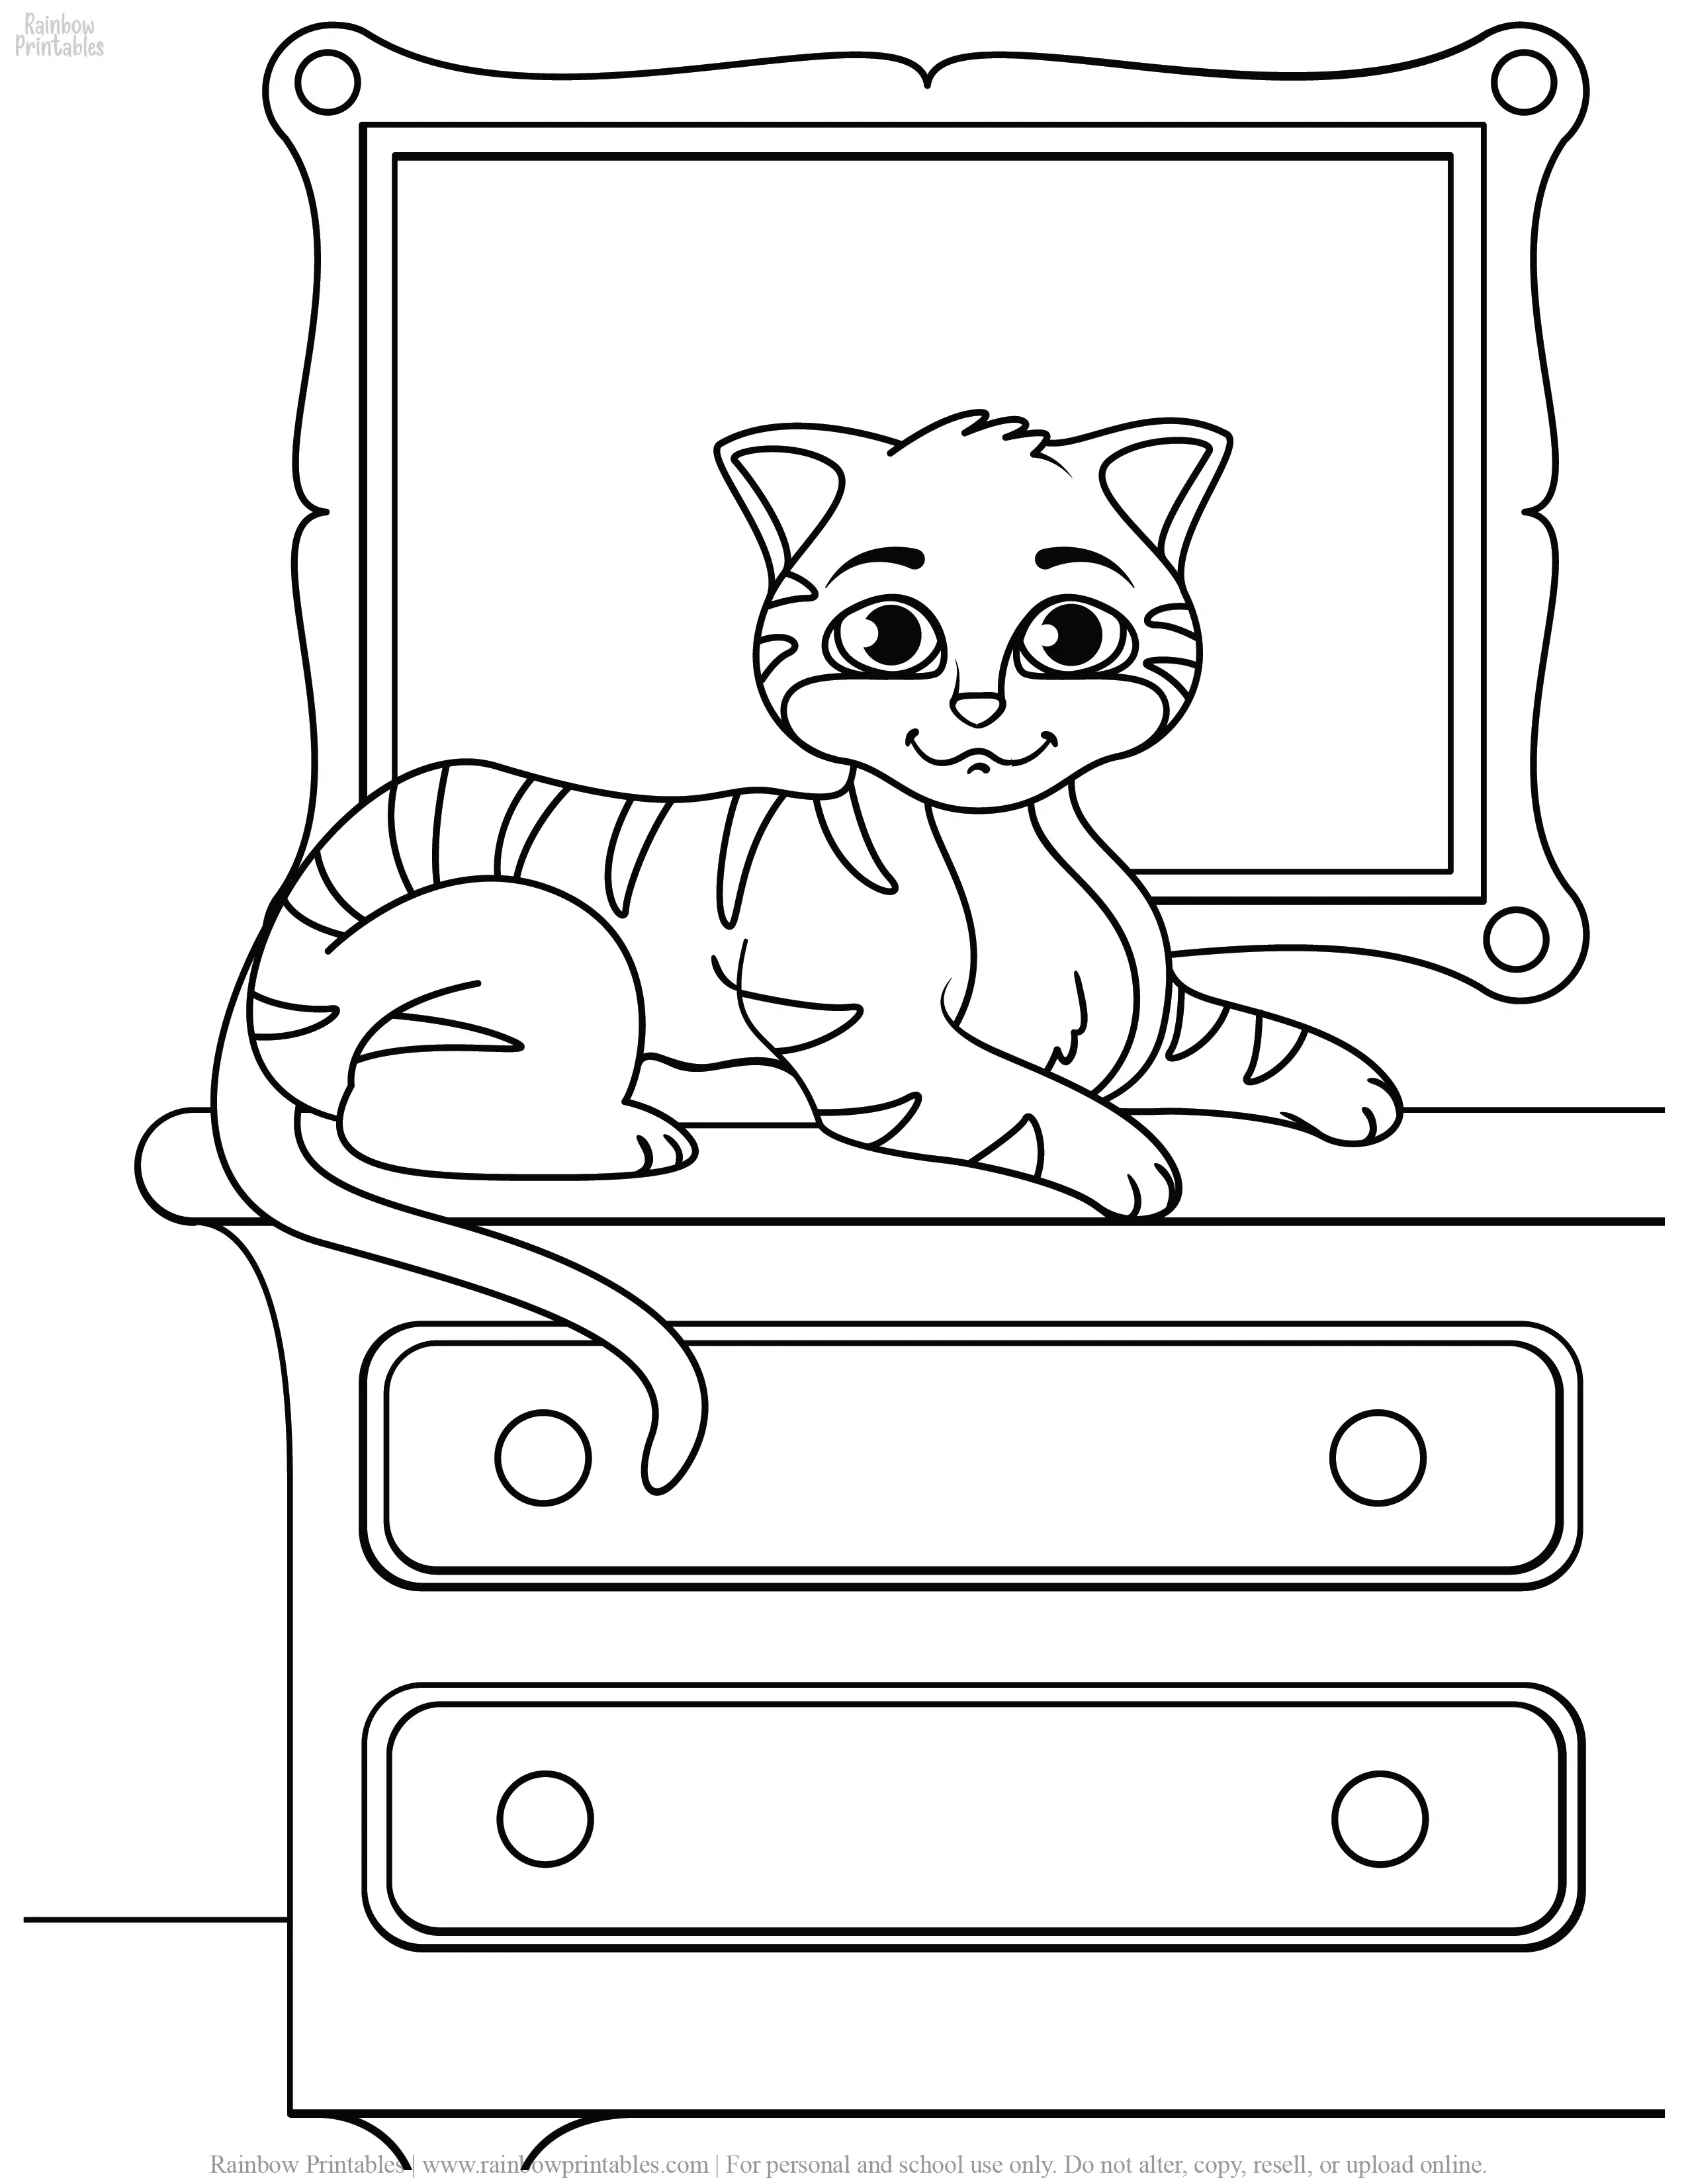 COLORING PAGES FOR GIRLS FREE PRINTABLE ACTIVITIES FOR KIDS